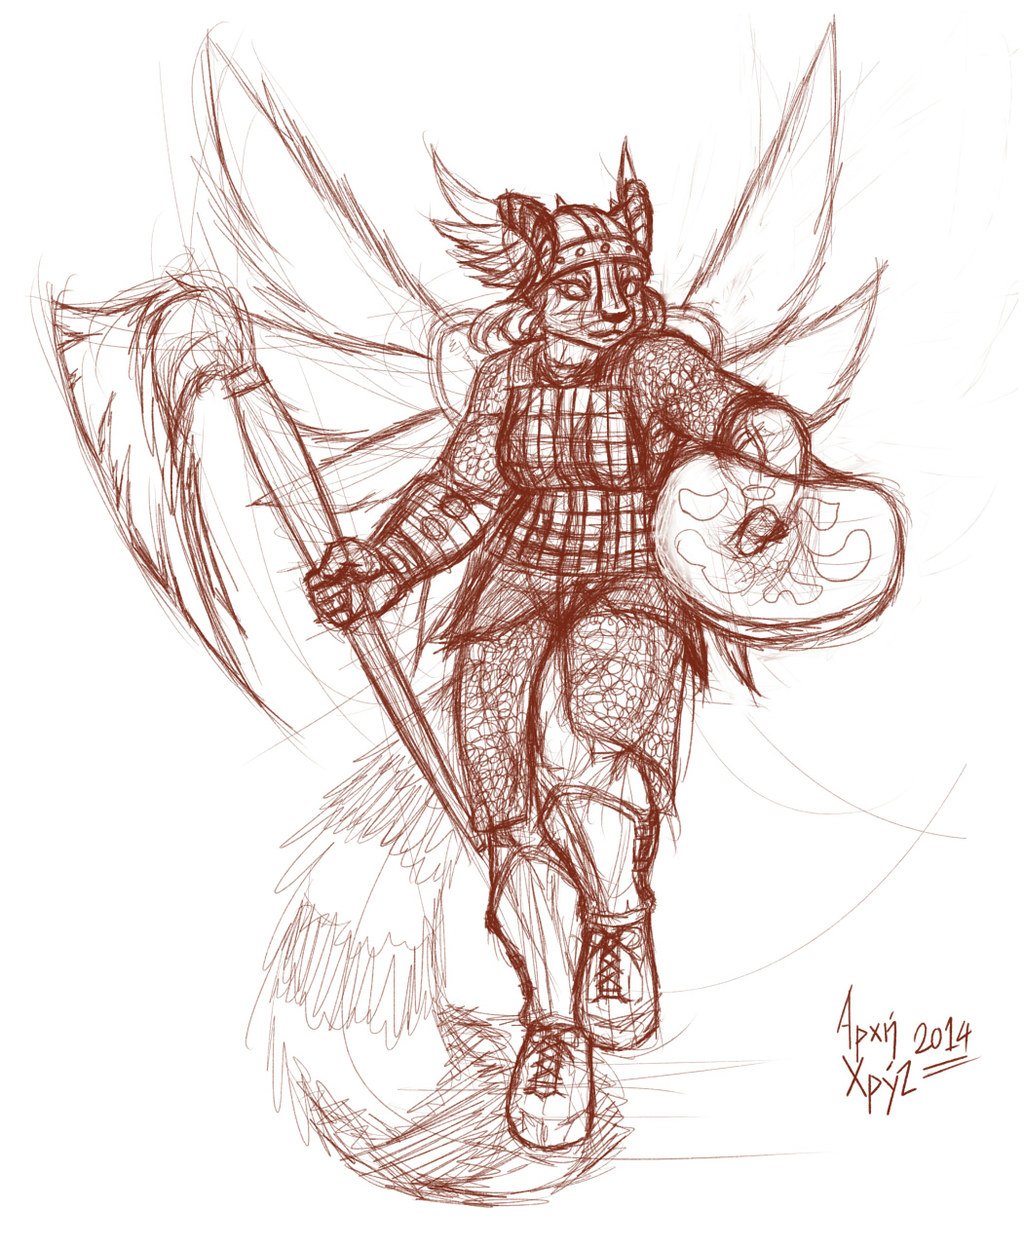 [Sketch] Project Valkyrie Mascot - Initial Concept